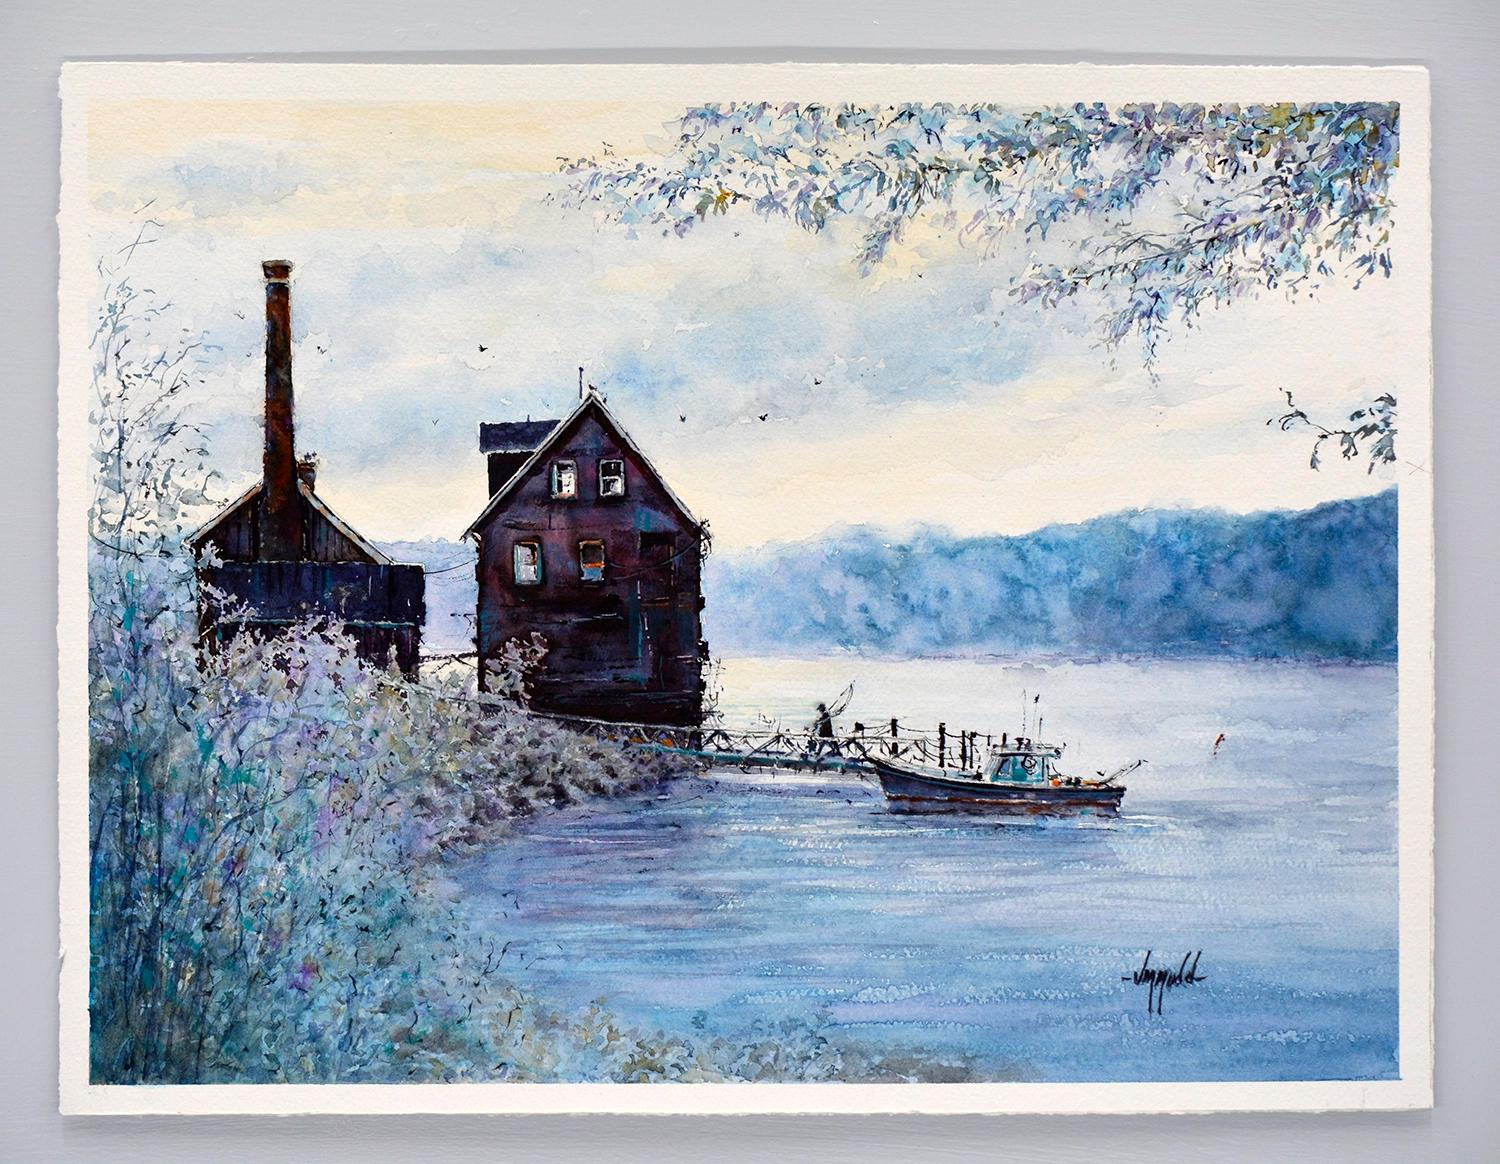 <p>Artist Comments<br>With his fishing gear slung over his back, a man heads towards the lakeside cabins, leaving his boat docked nearby. The calming blue of the water and distant treeline surround him, creating a tranquil atmosphere. Artist Judy